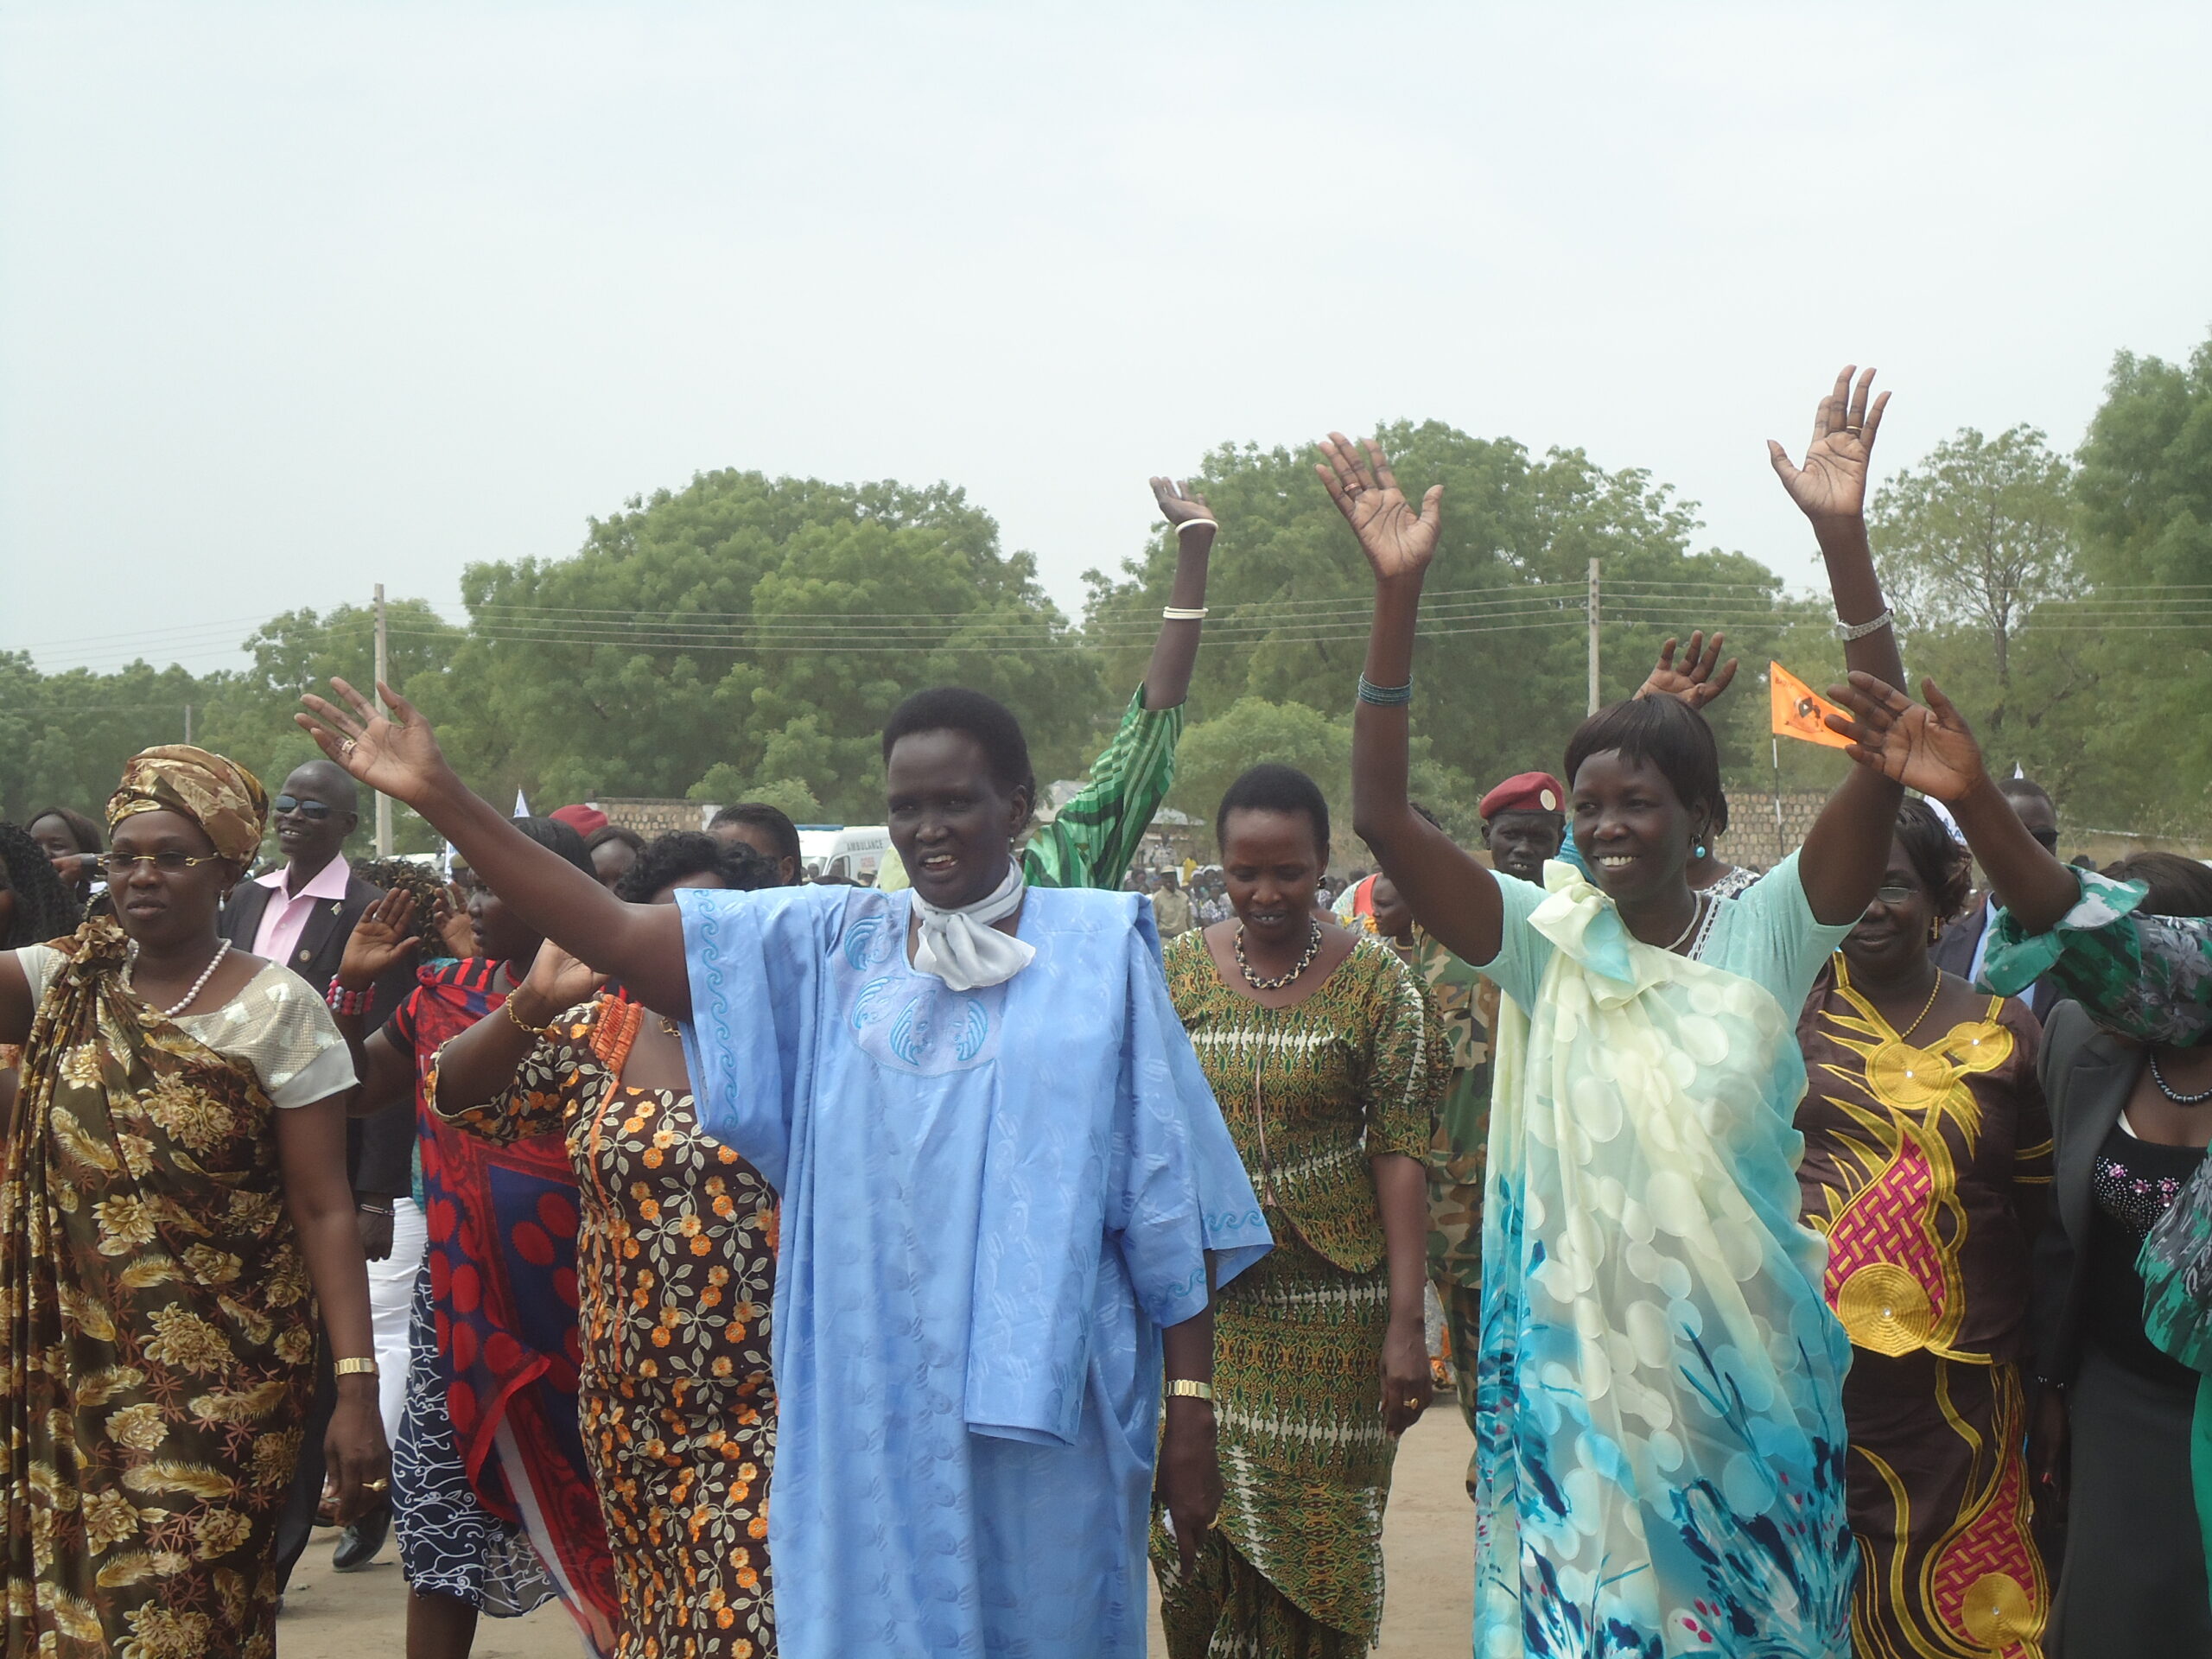 Women leaders, from the left, Angilina Teny, the wife of South Sudan's Vice President Riek Machar, Rebecca Nyandeng, Presidential Adviser on gender and human rights, among others saluting women and men in Bor's Freedom Square, March 8, 2013 (ST)